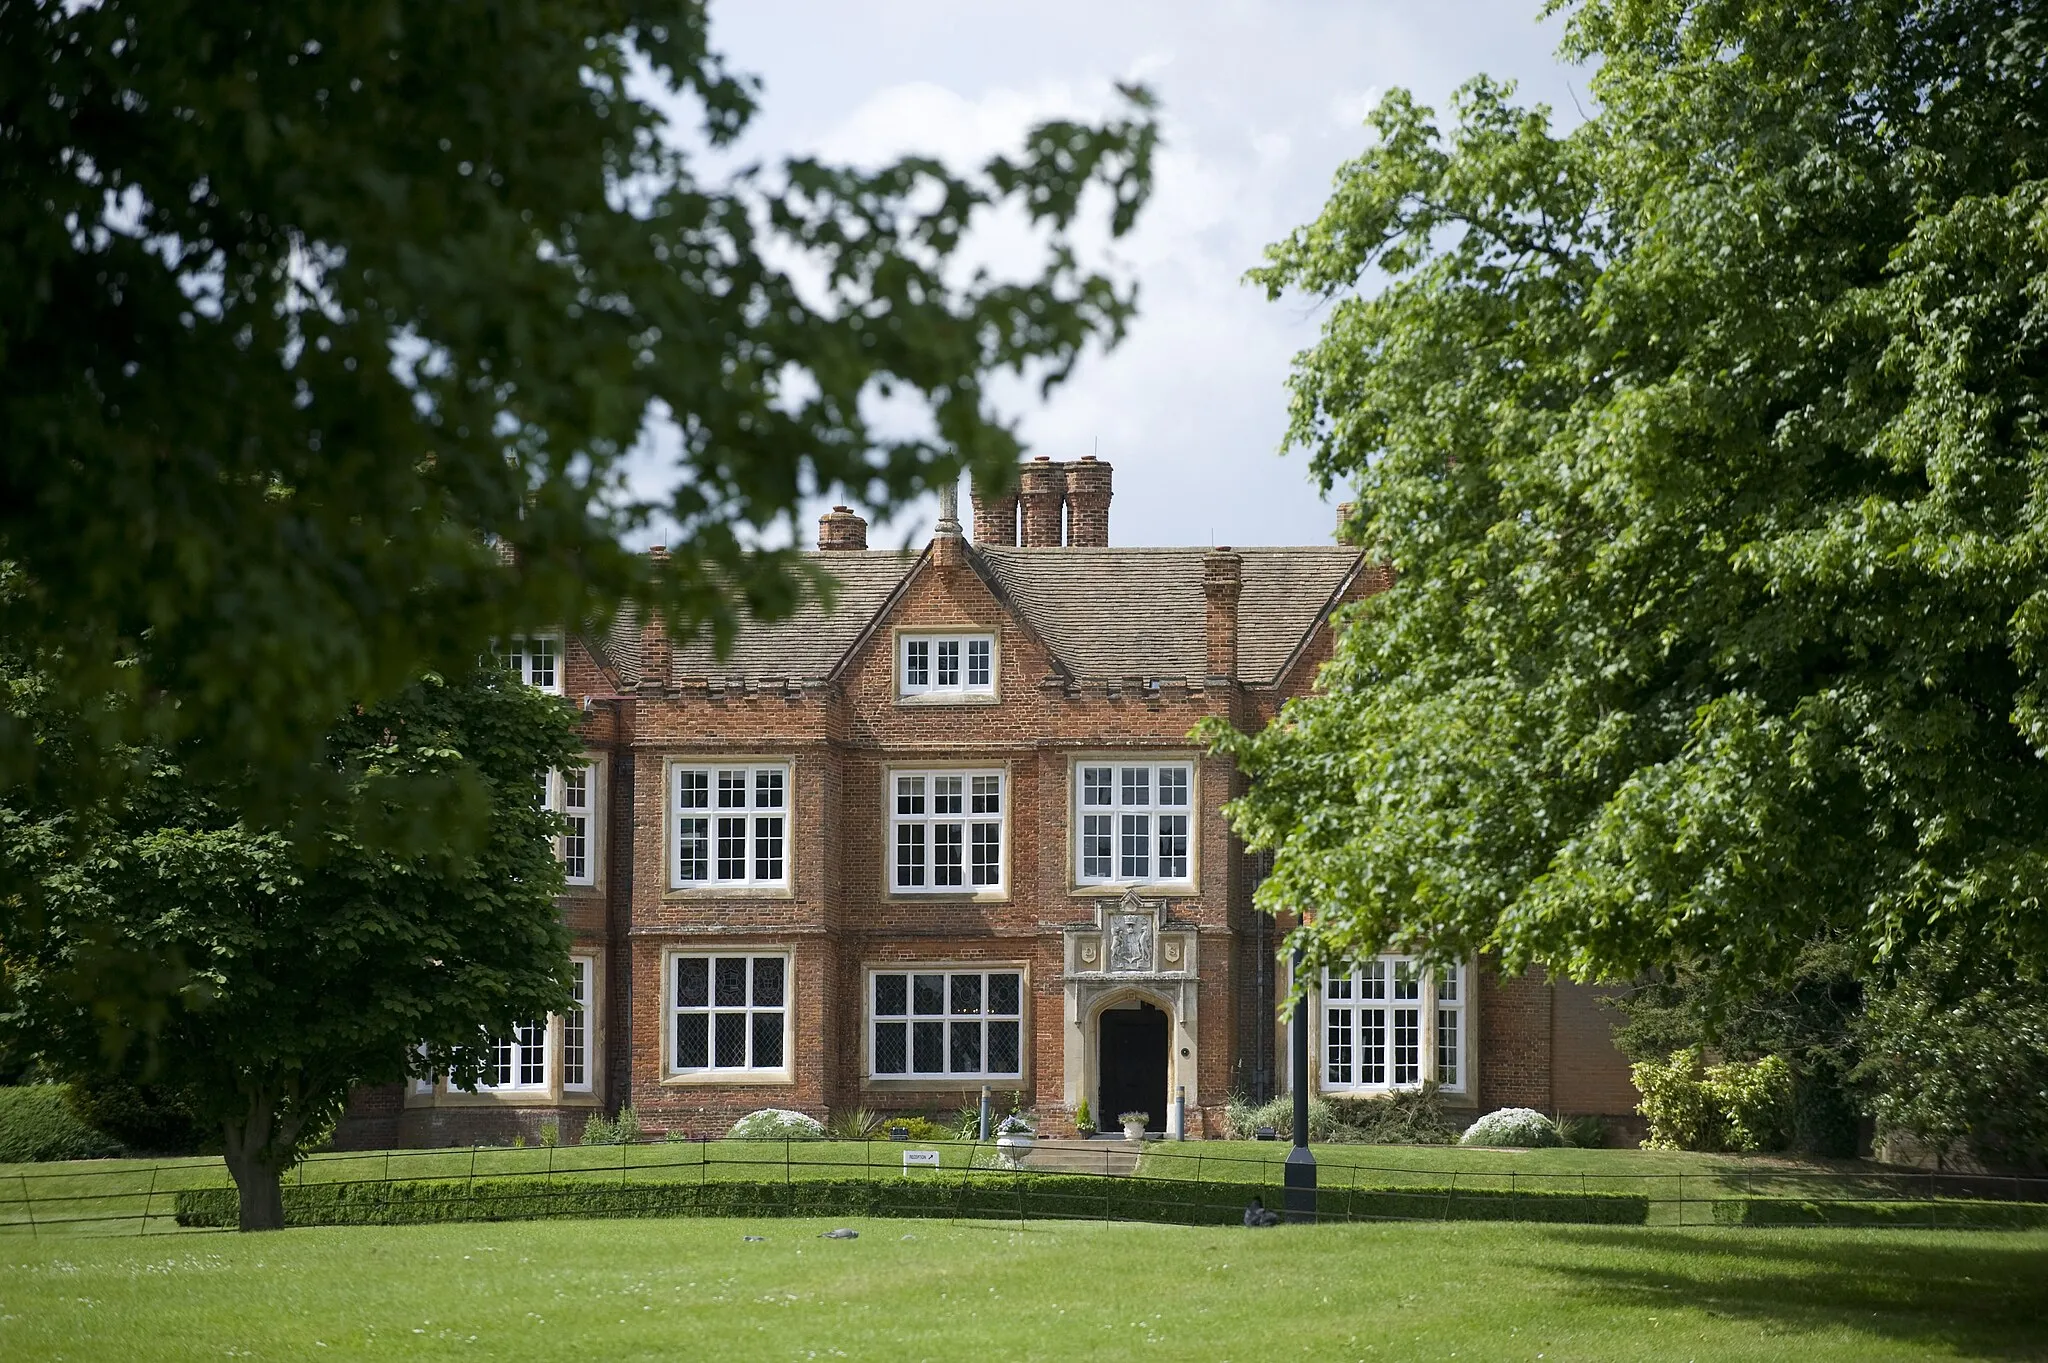 Photo showing: Bourn Hall, the world's first IVF clinic founded by Steptoe, Edwards and Purdy